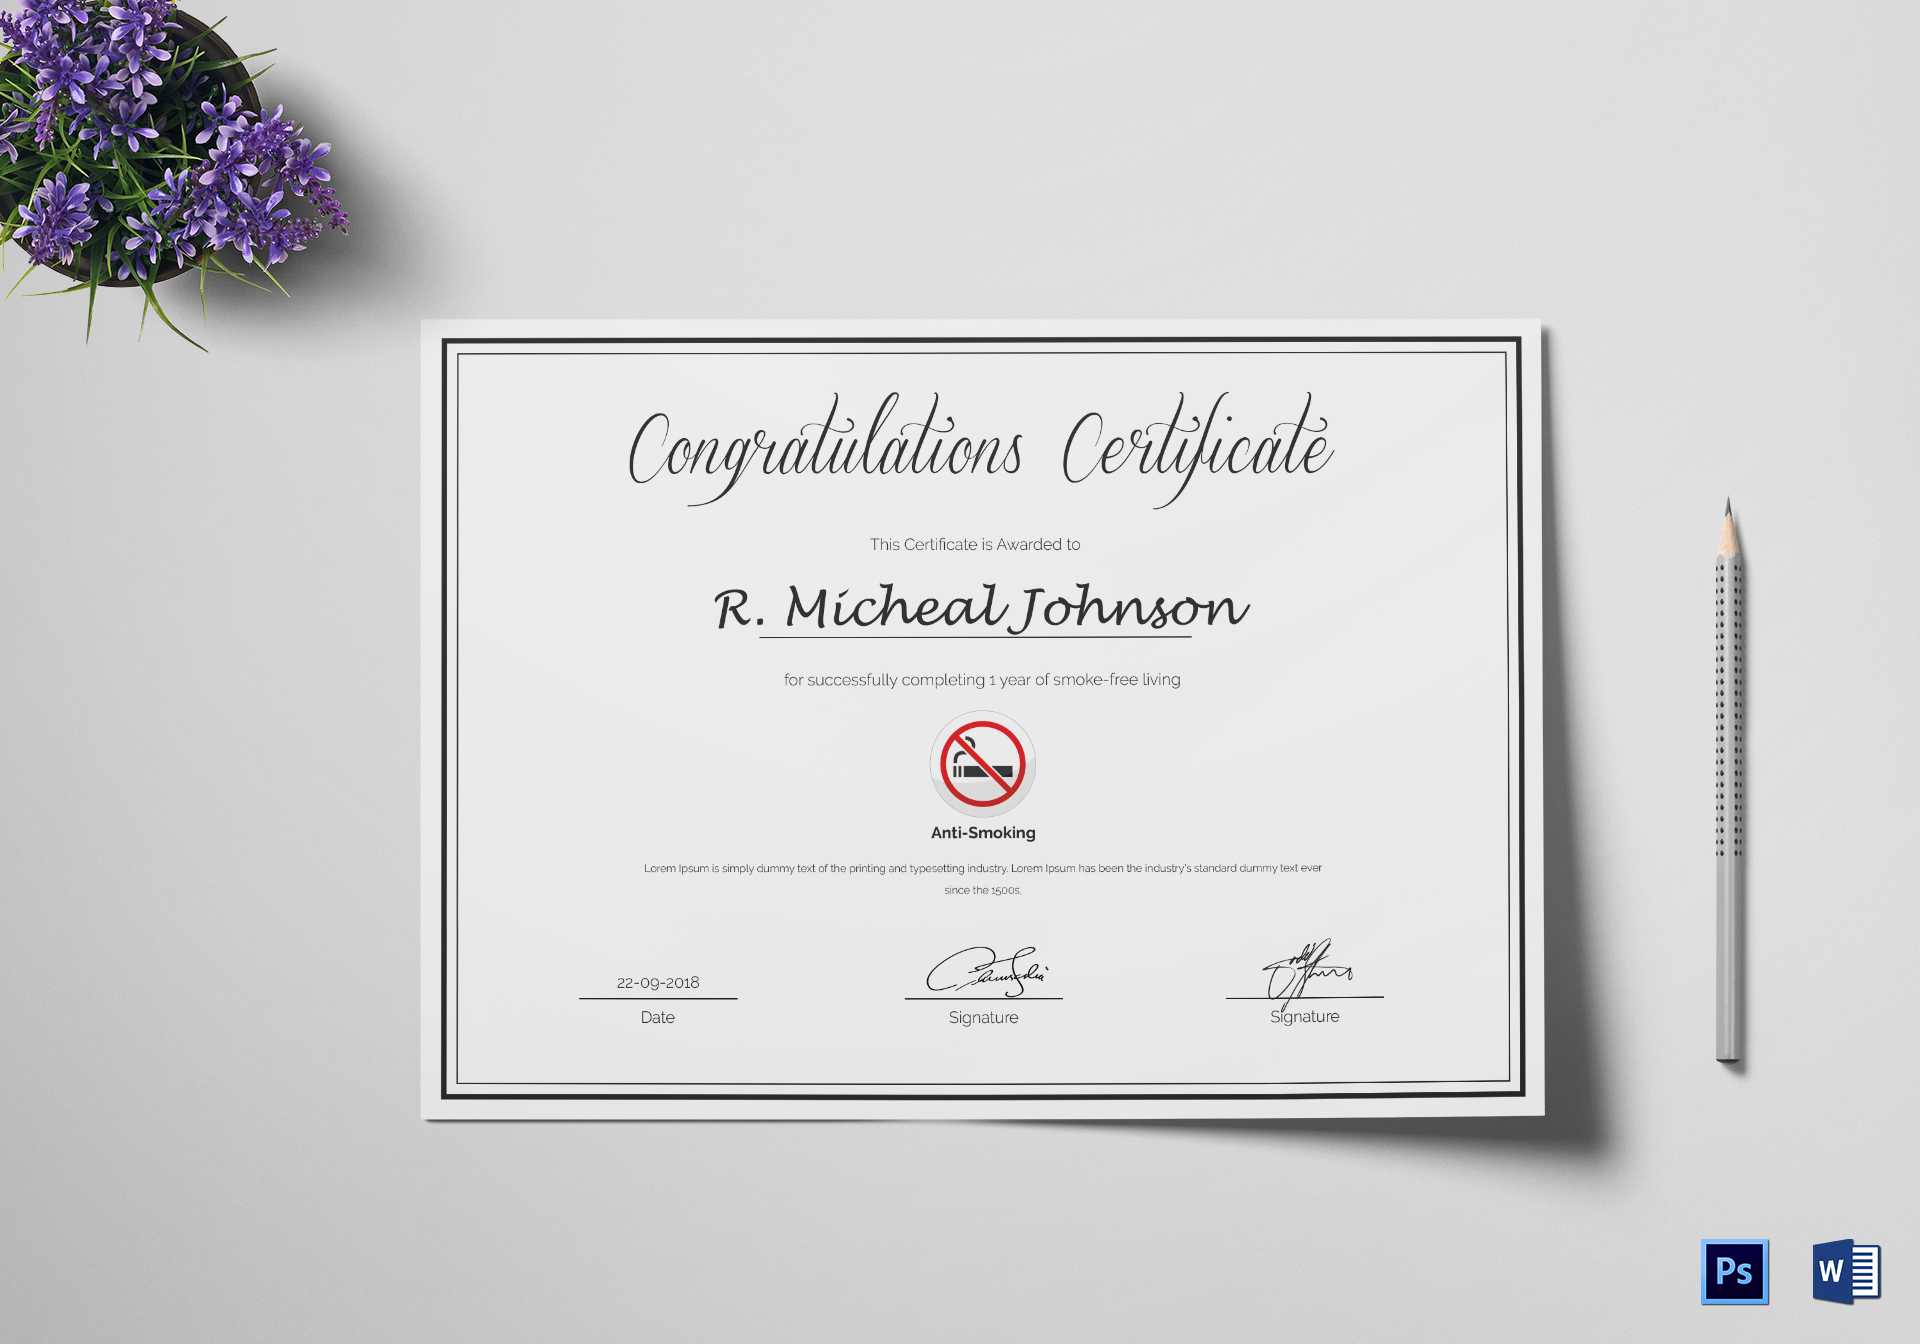 Certificate Of Congratulations For Quitting Smoking Template Regarding Congratulations Certificate Word Template